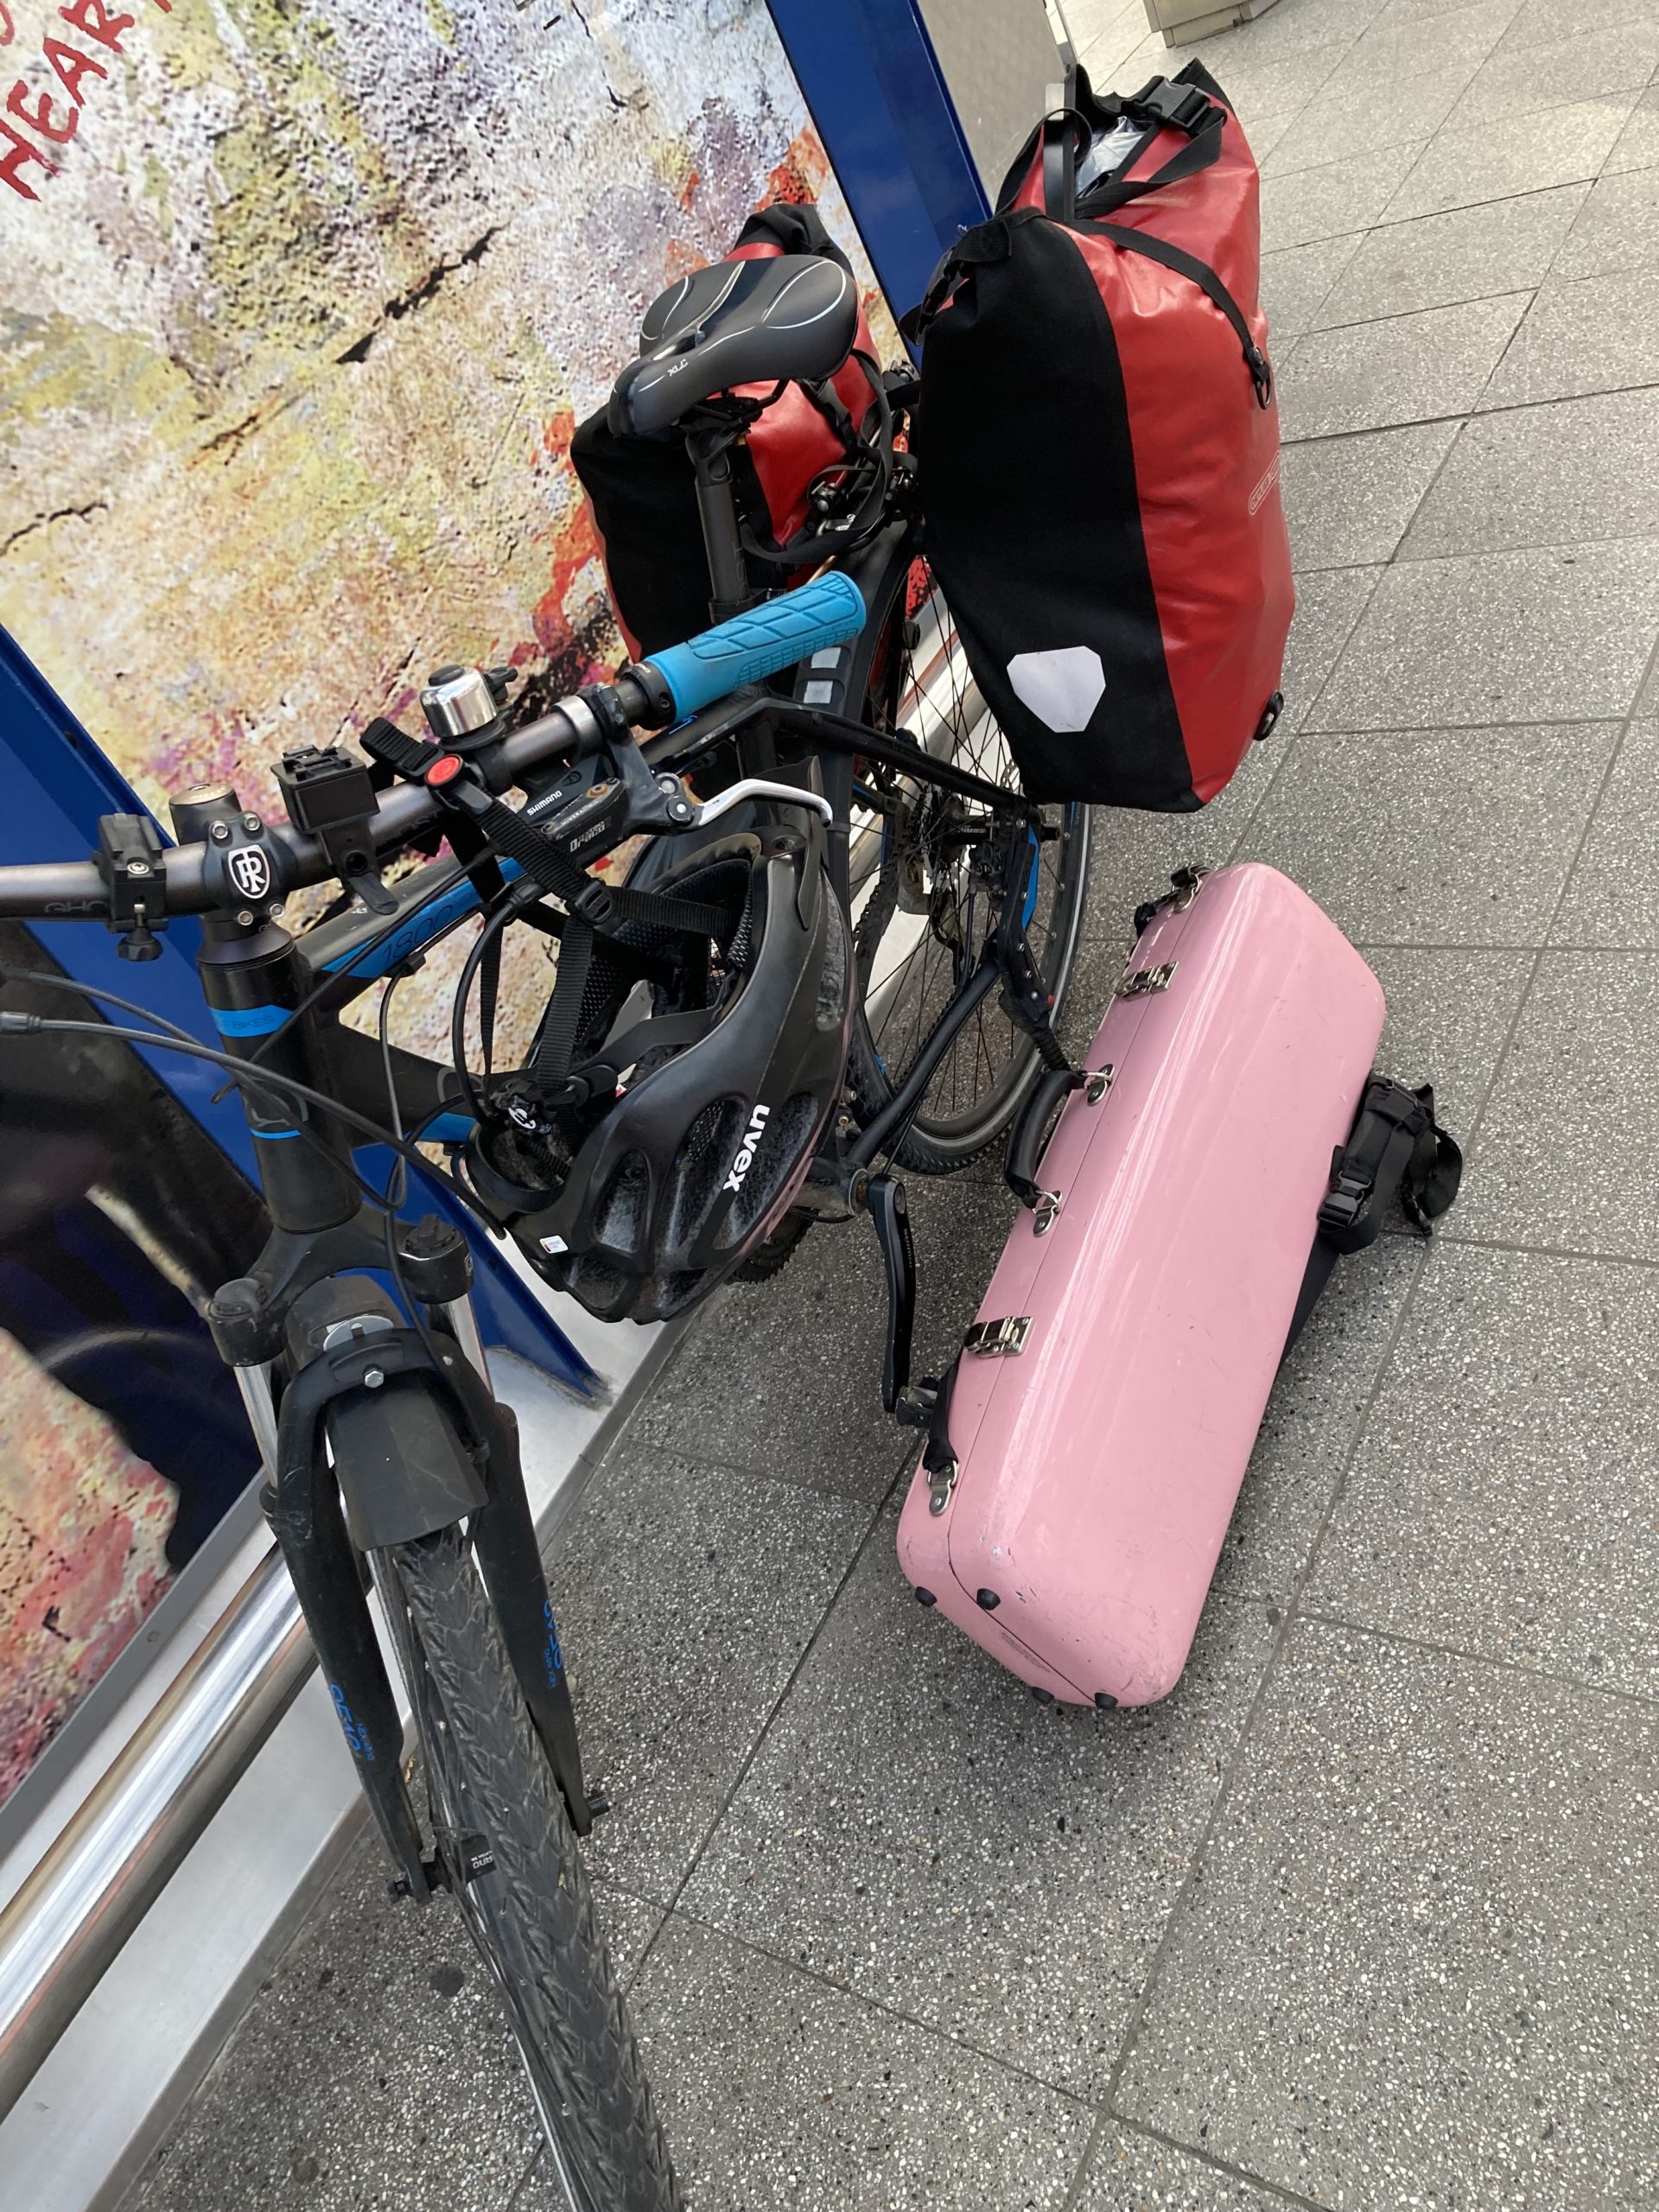 Bicycle with fully-packed saddlebags, pink violin case next to it, bike helmet hanging from handlebars